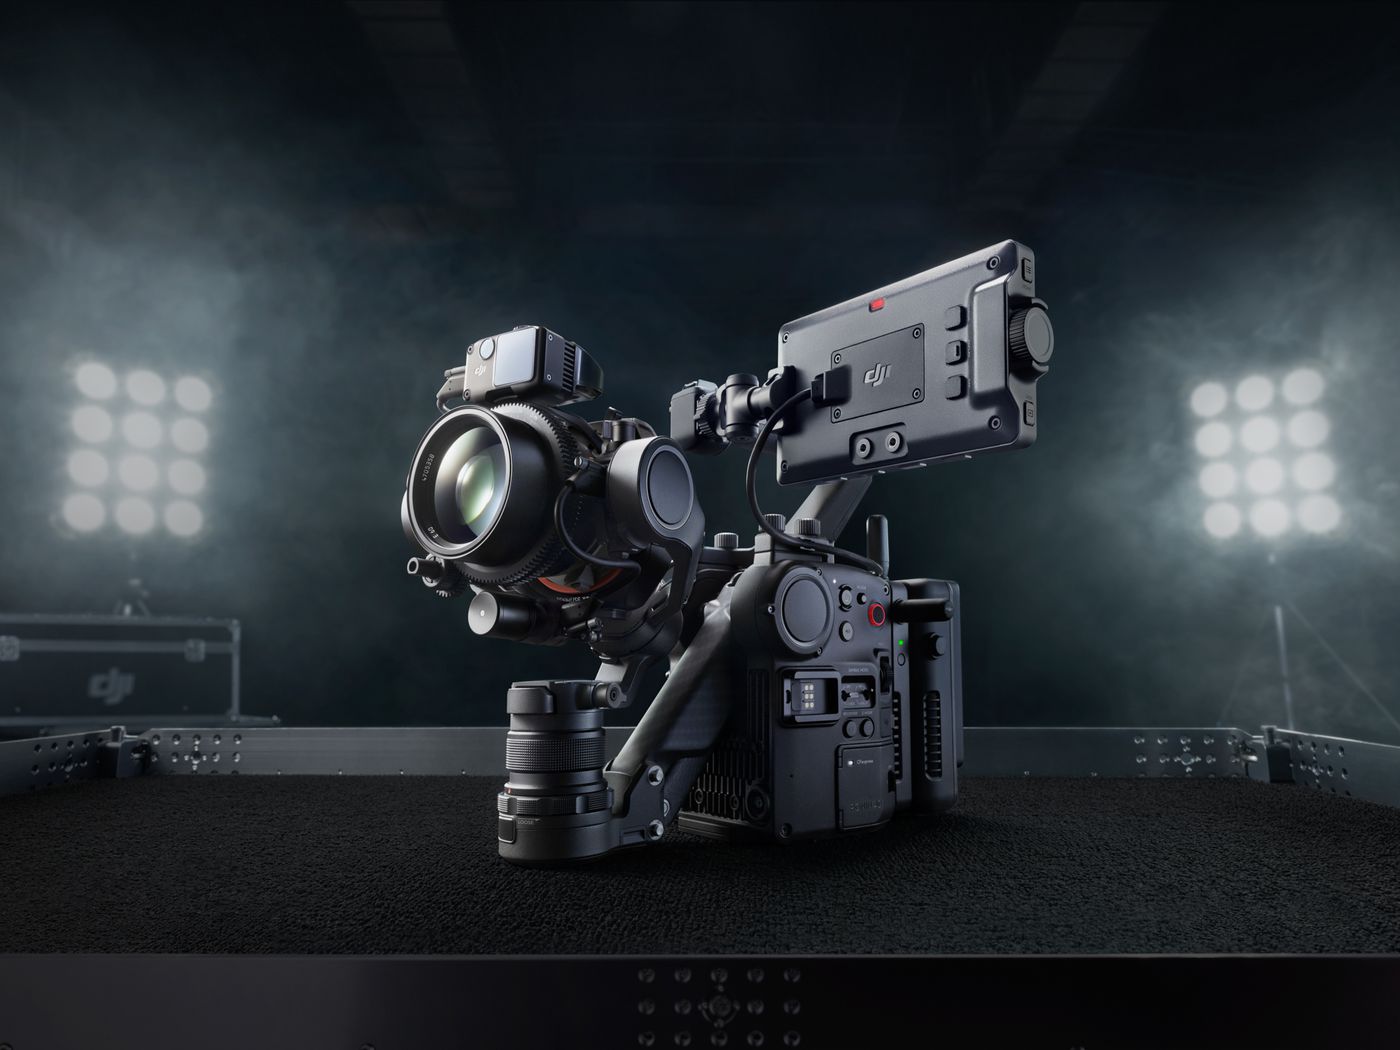 DJI is making a cinema camera with a built in gimbal and LIDAR